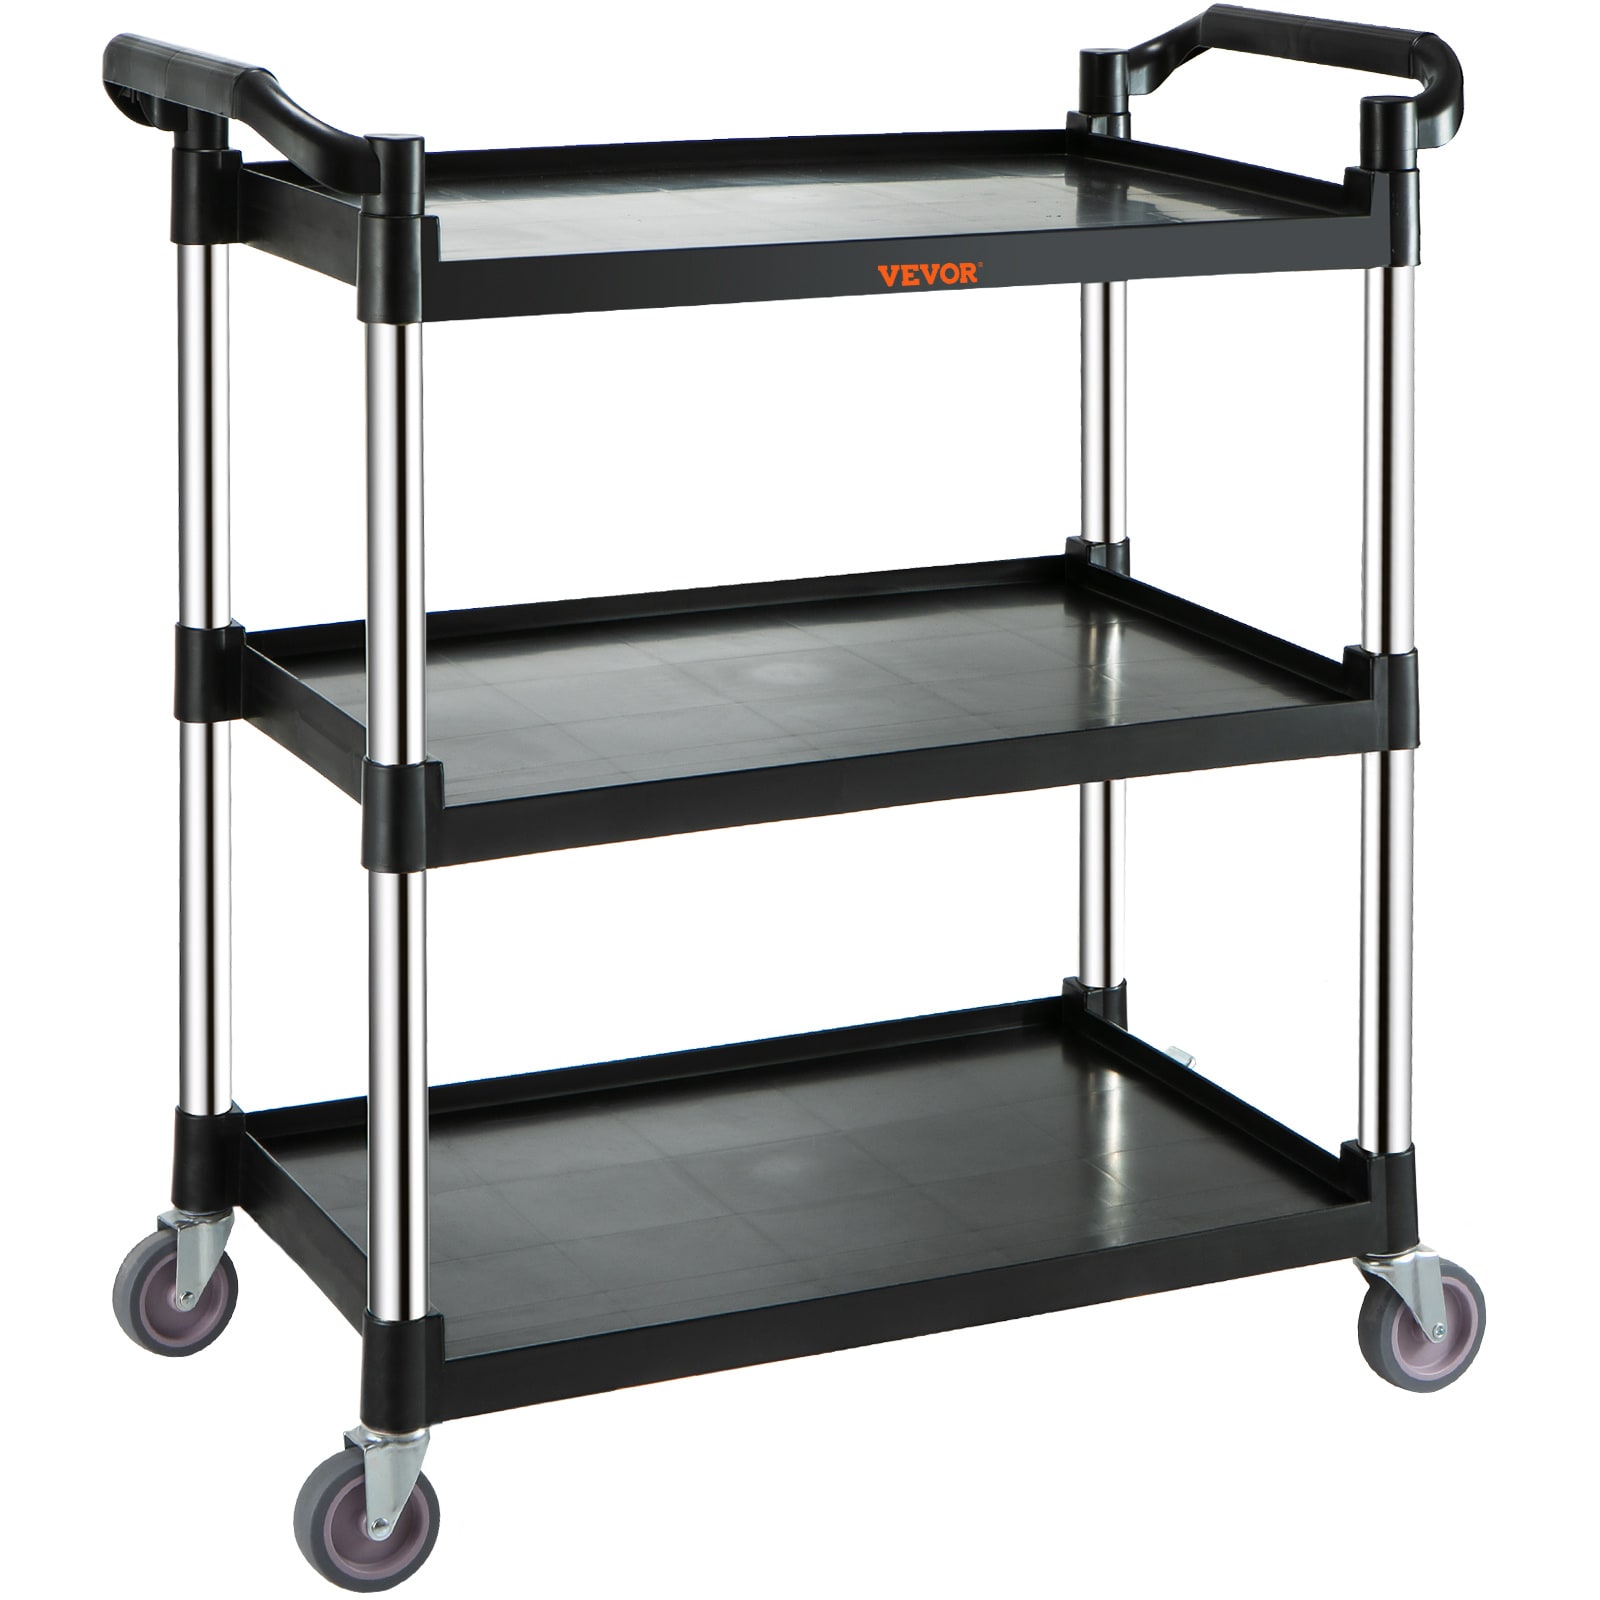 Kobalt 32.6-in-Drawer Shelf Utility Cart in the Utility Carts department at